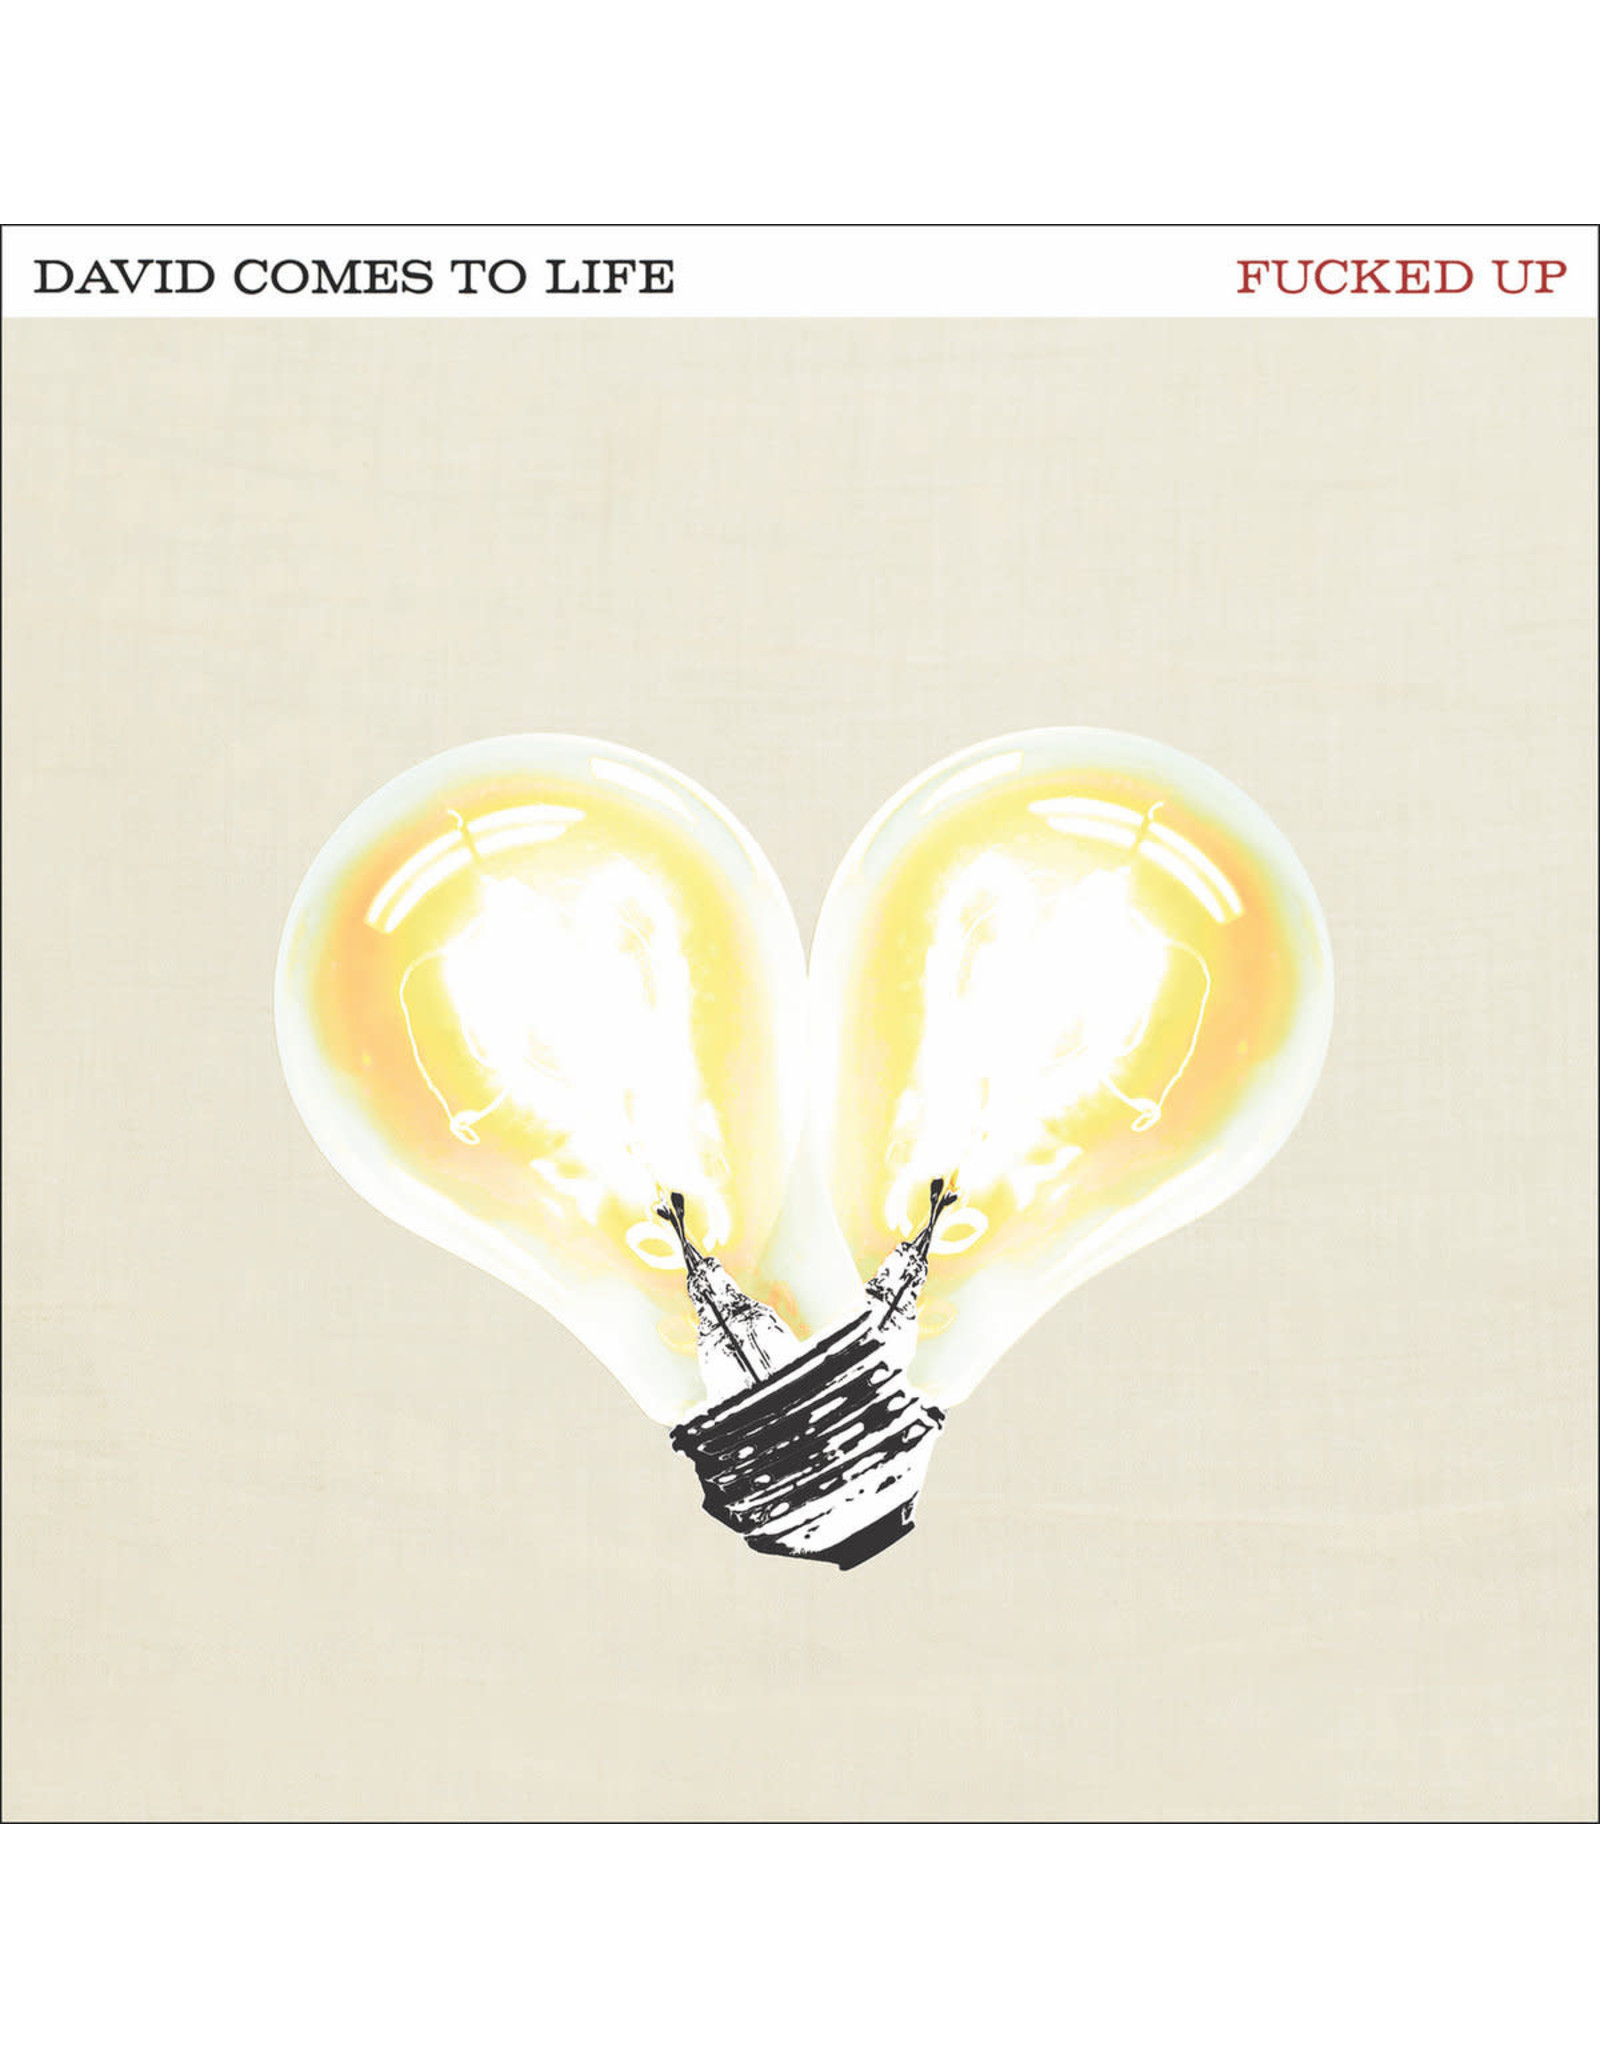 New Vinyl Fucked Up - David Comes To Life (10th Anniversary, Colored) 2LP